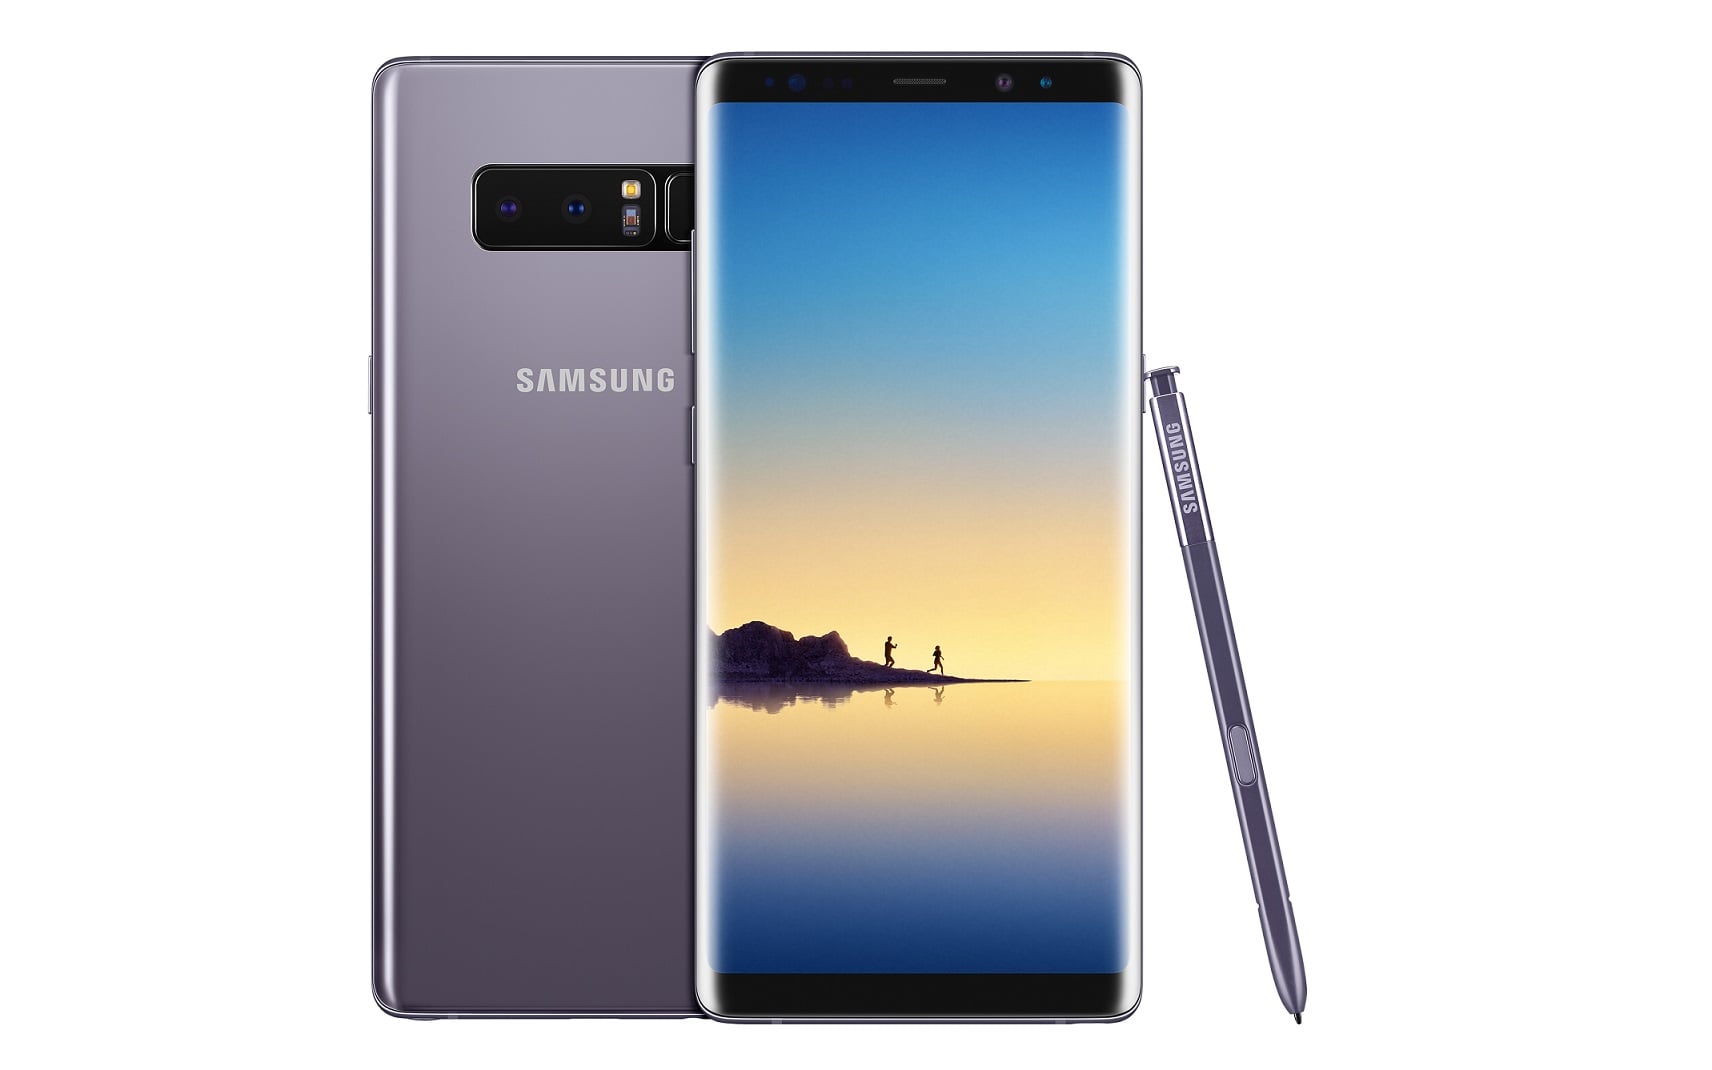 Samsung Launches Galaxy Note 8 at Unpacked Event